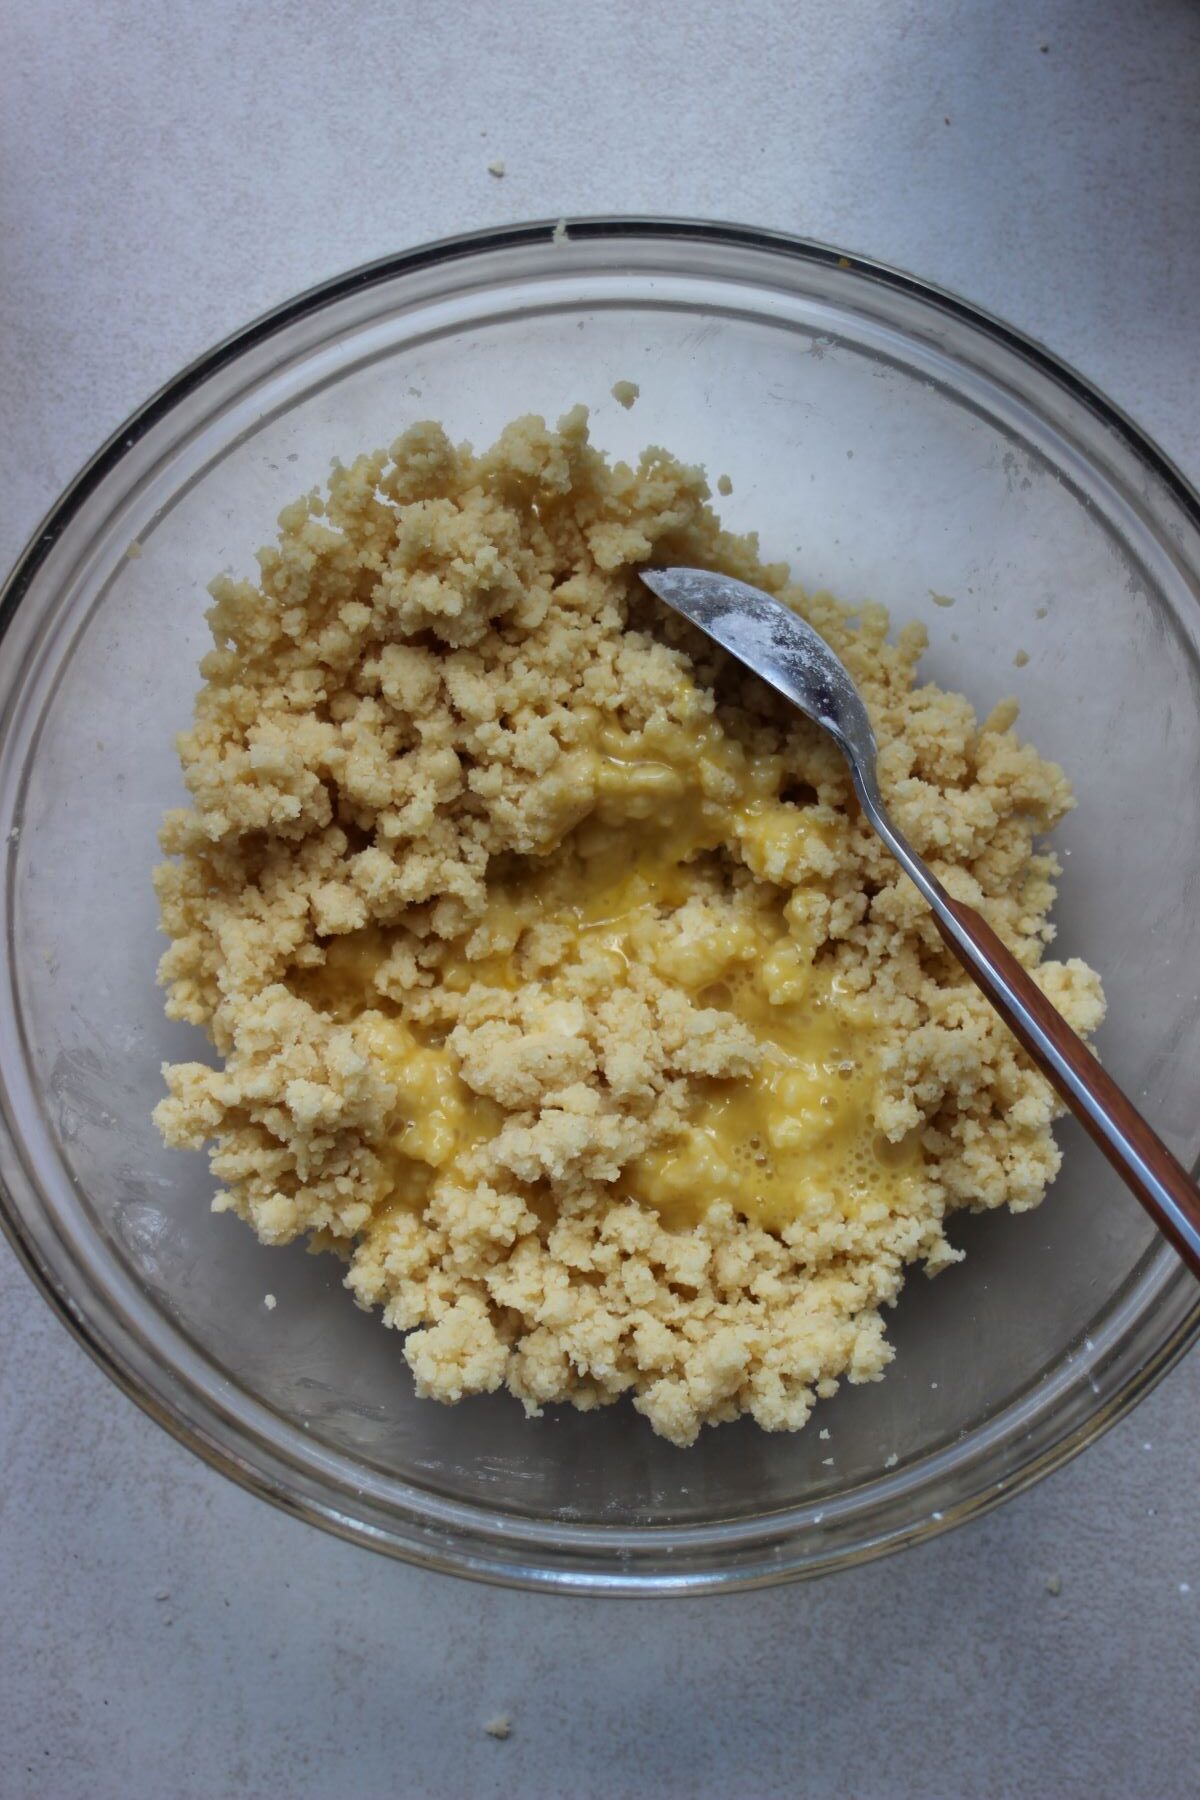 Glass bowl with dough crumbs, egg yolks and a spoon.